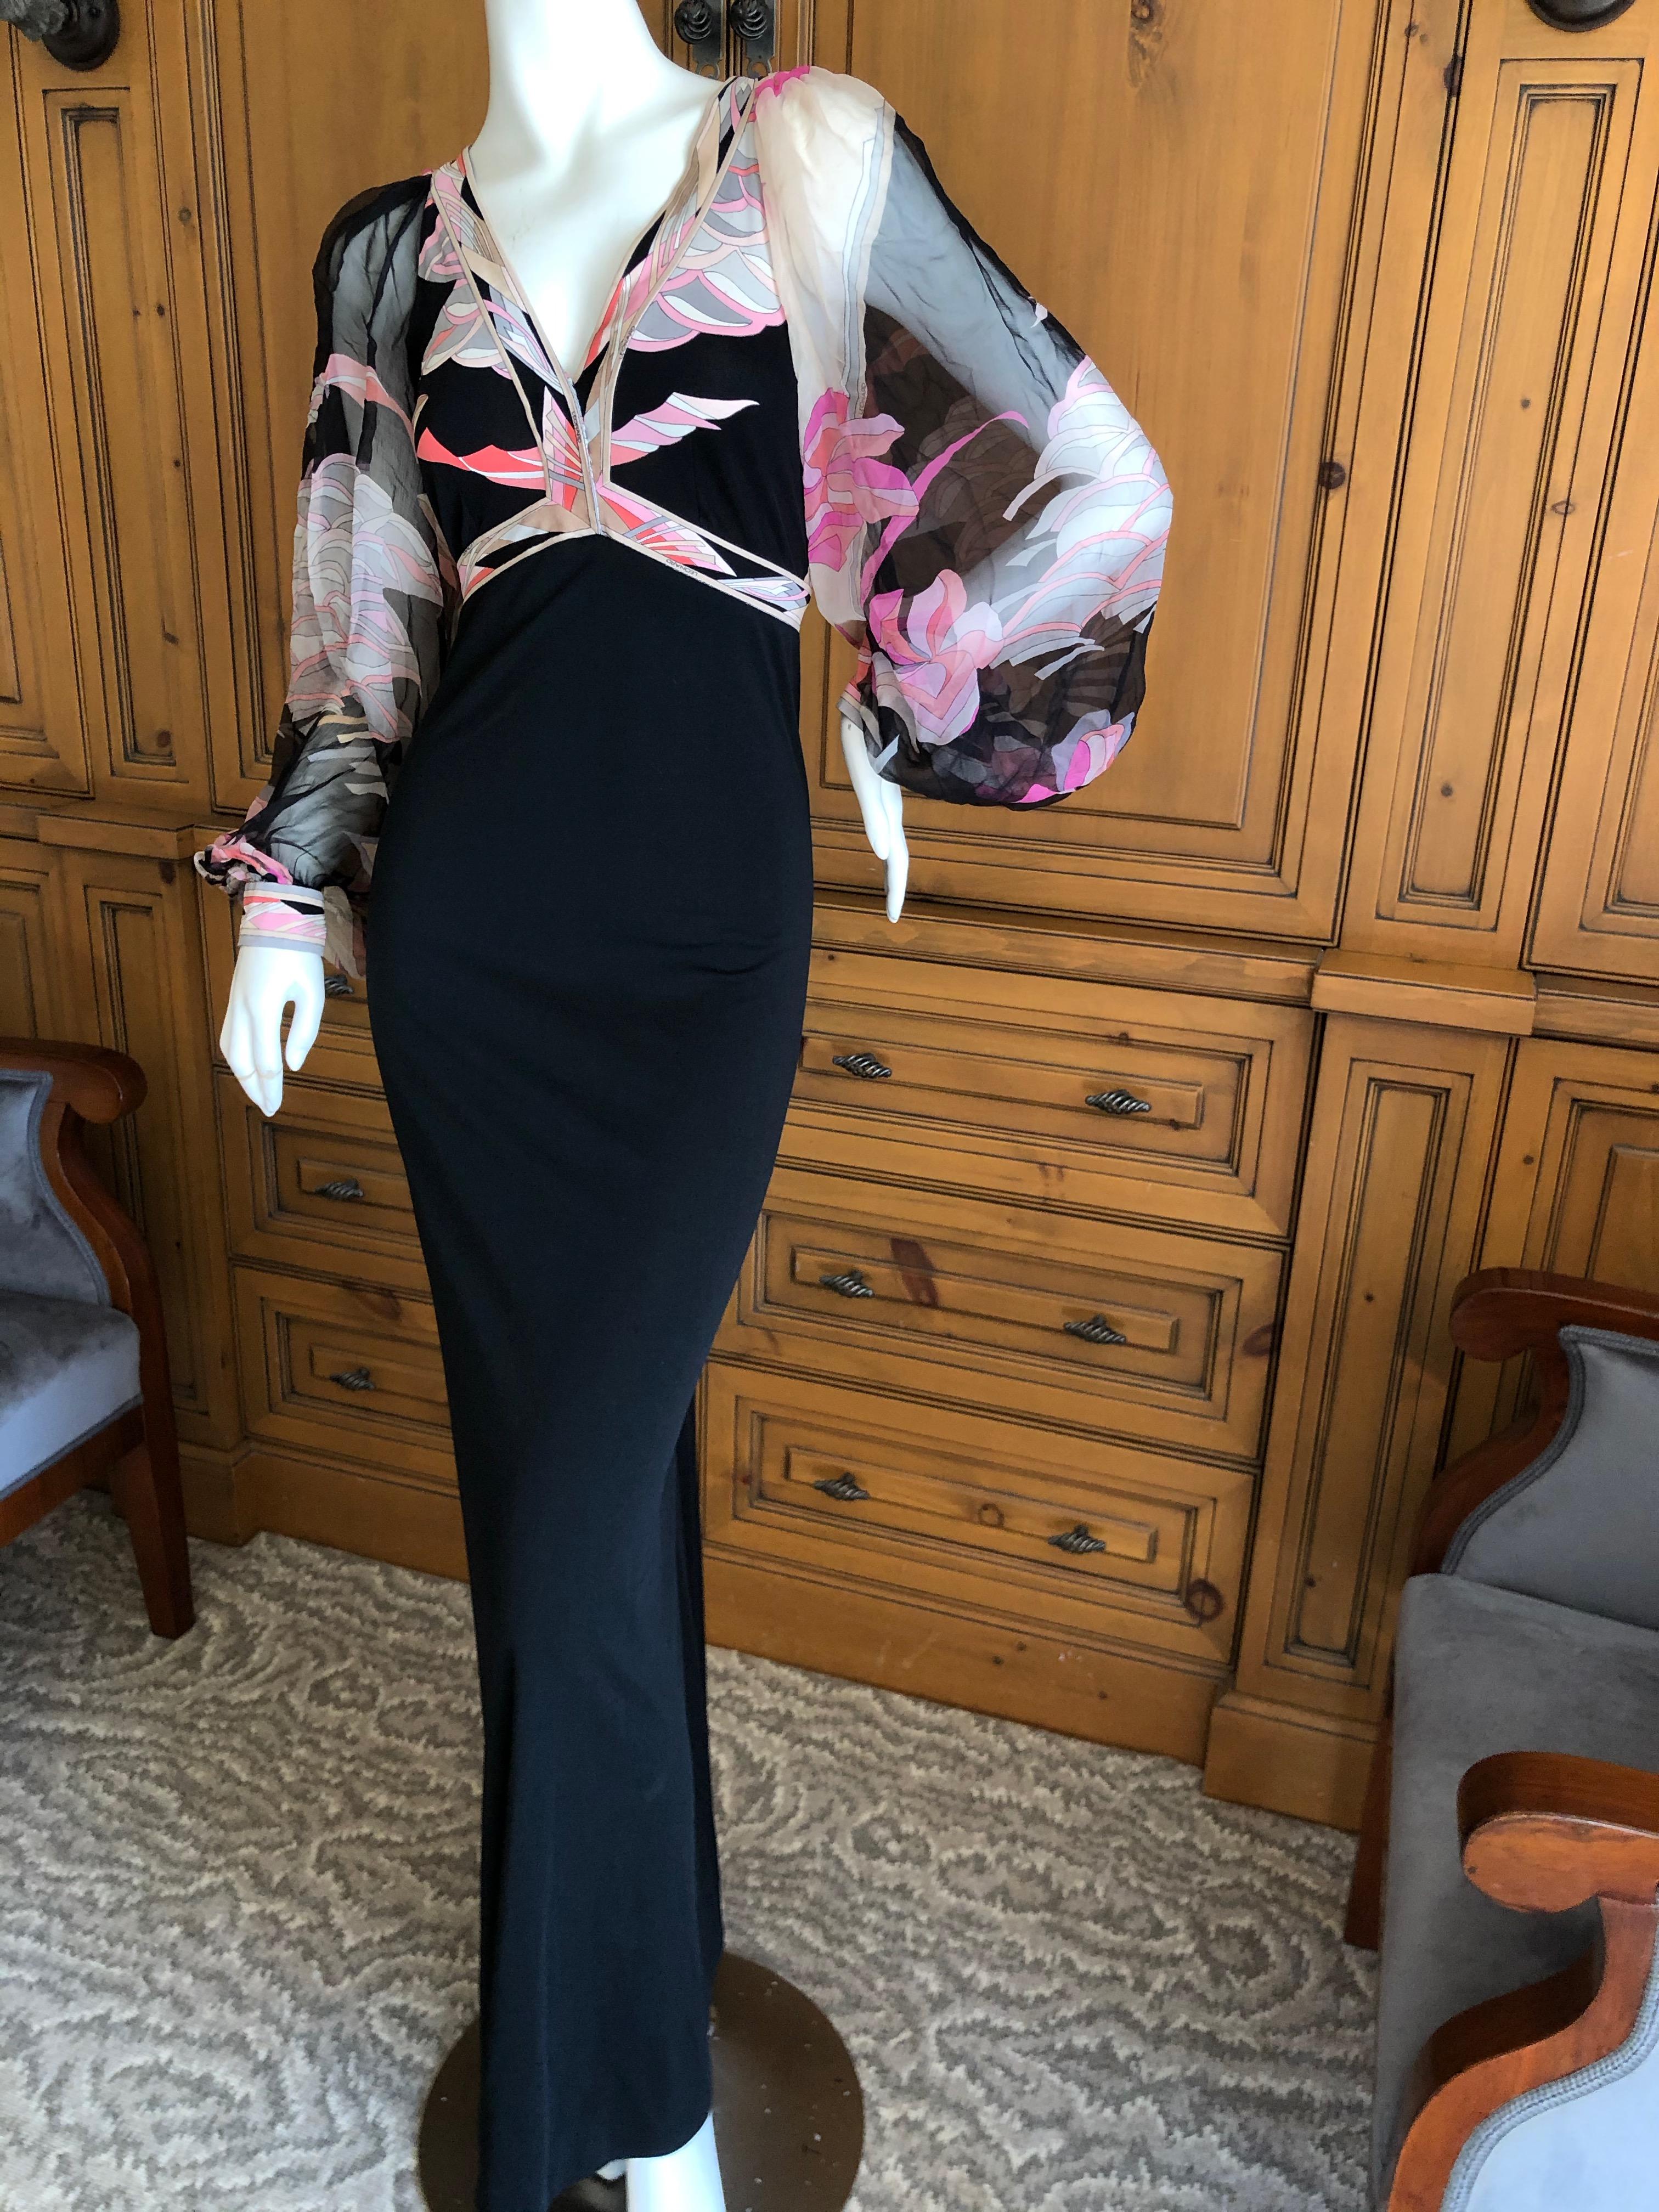 Leonard Paris Silk Jersey Vintage Long Evening Dress with Sheer Poet Sleeve .
I think the bust might have been sewn up a little for modesty, it was originally very very low cut.
Leonard Paris was a contemporary of Pucci, both houses creating